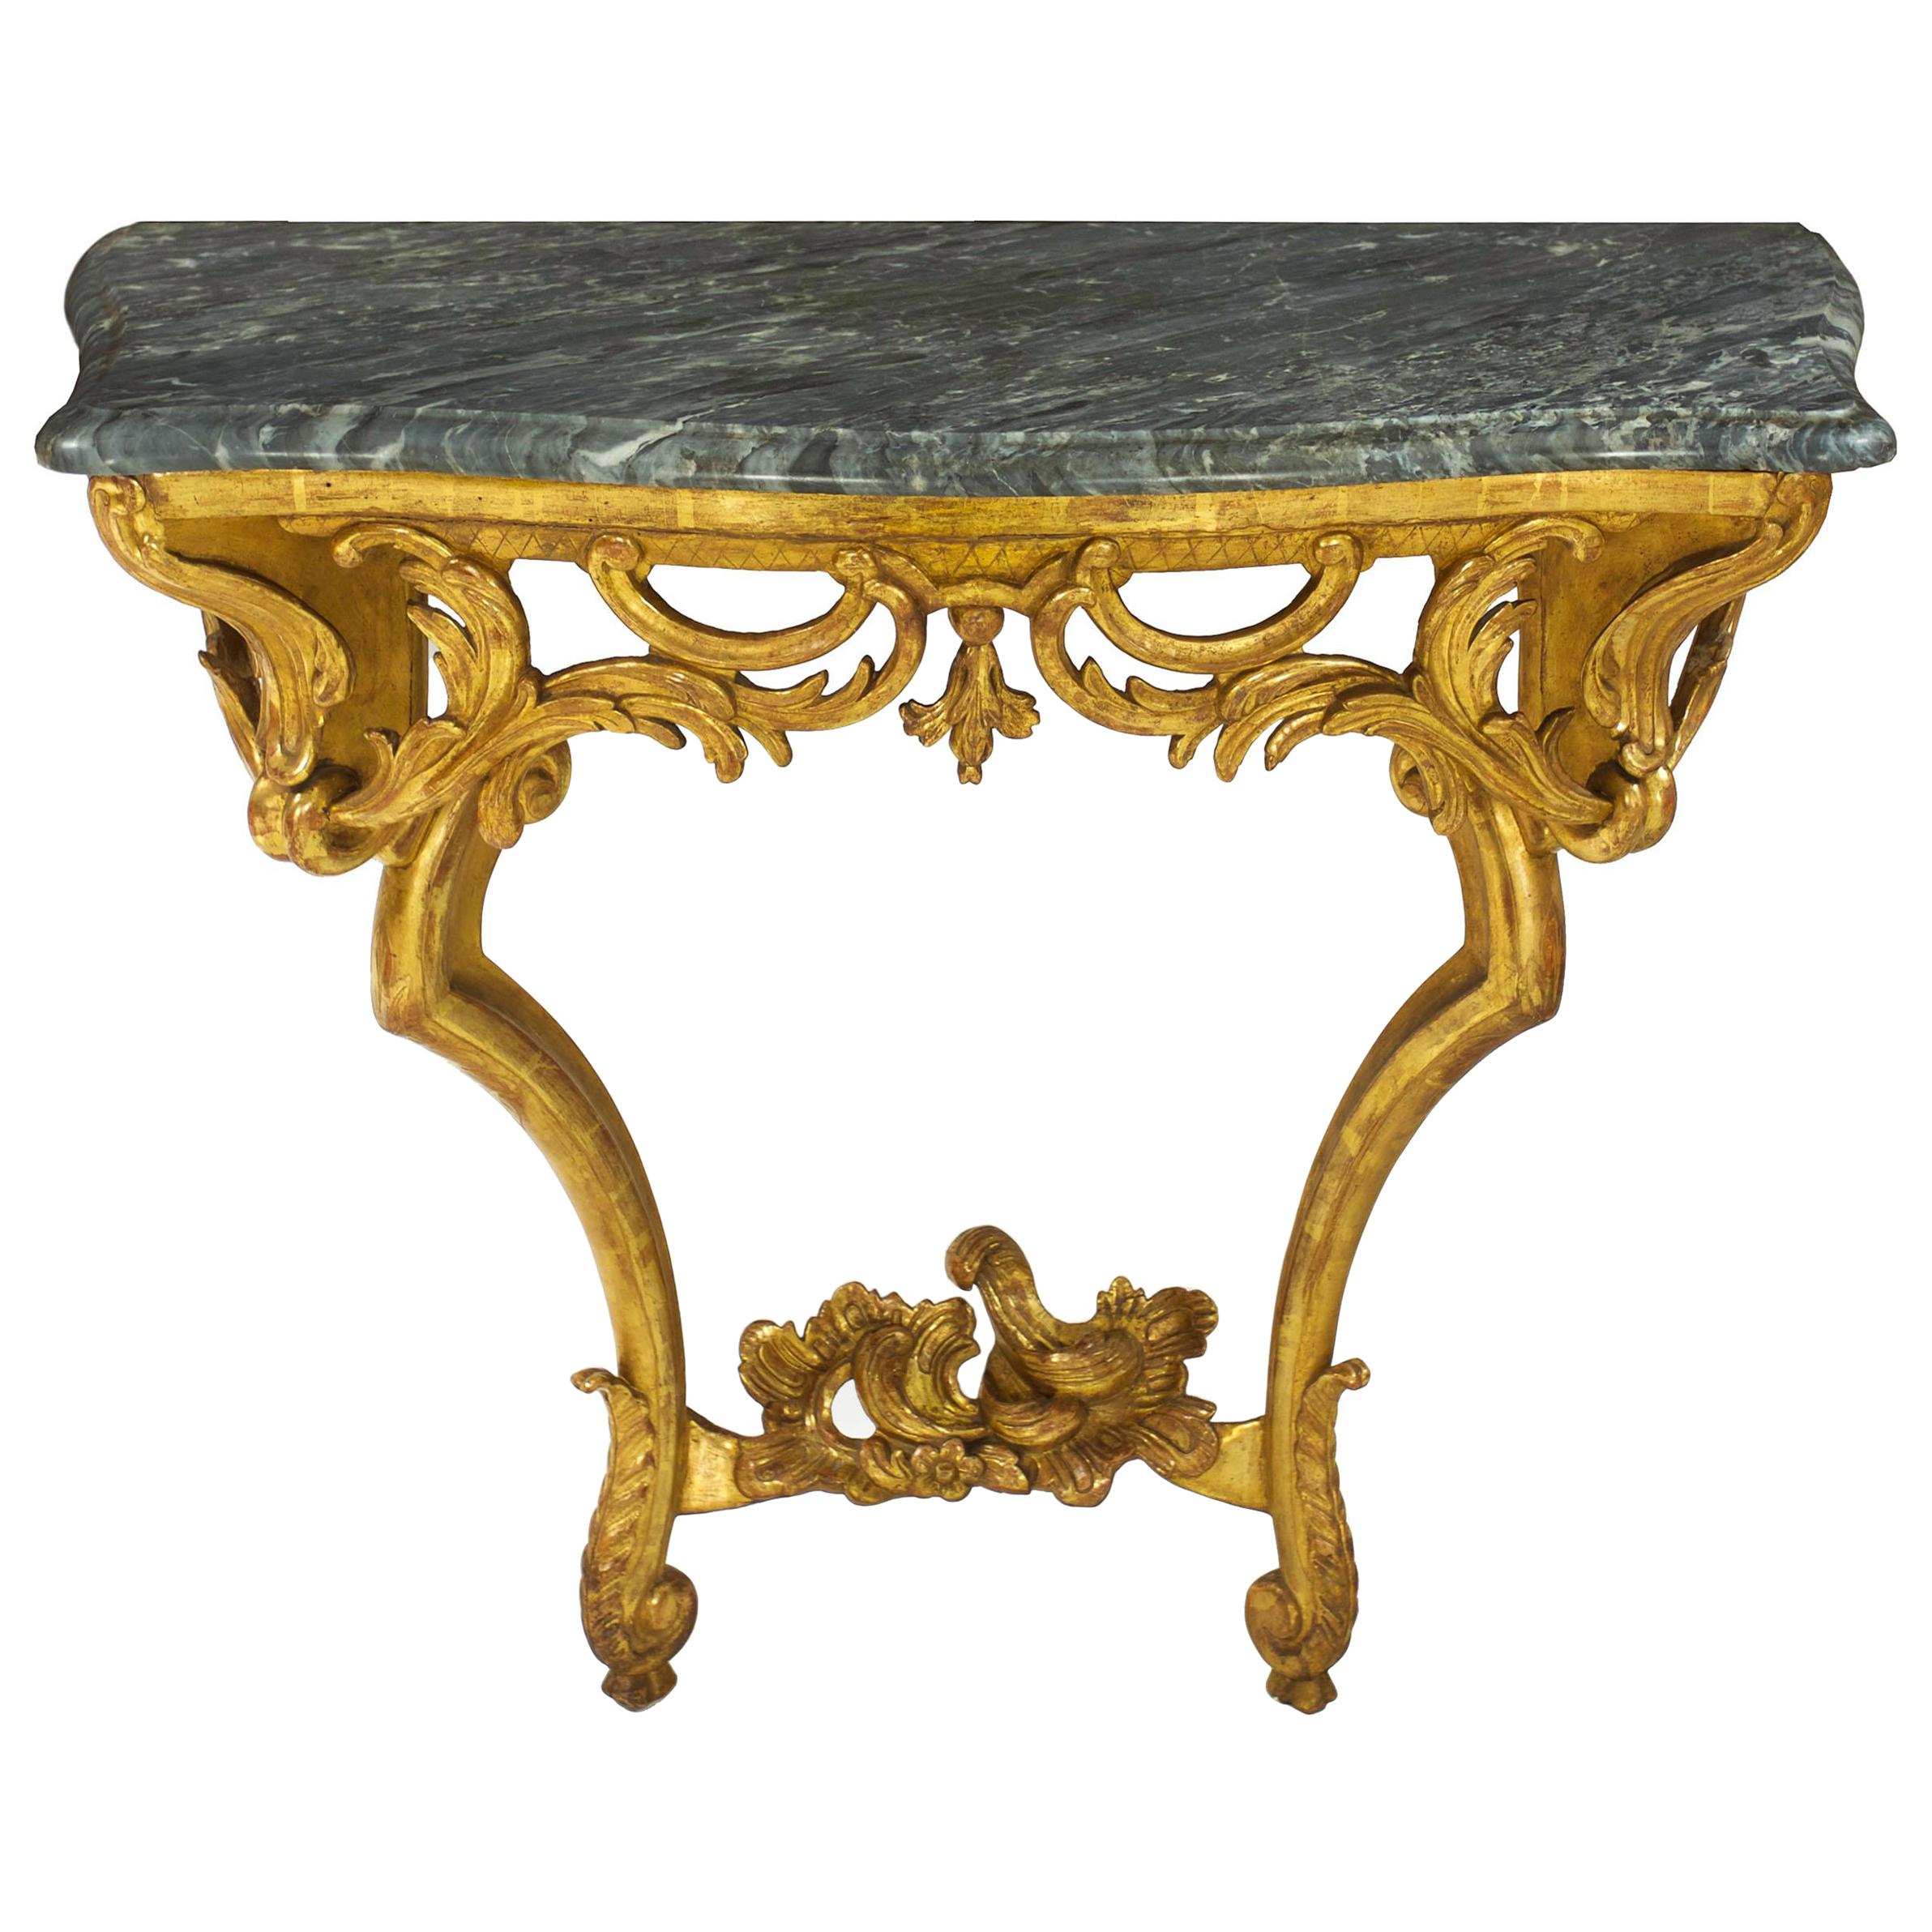 Rococo Style Carved Giltwood Antique Pier Console Table, 19th Century For Sale